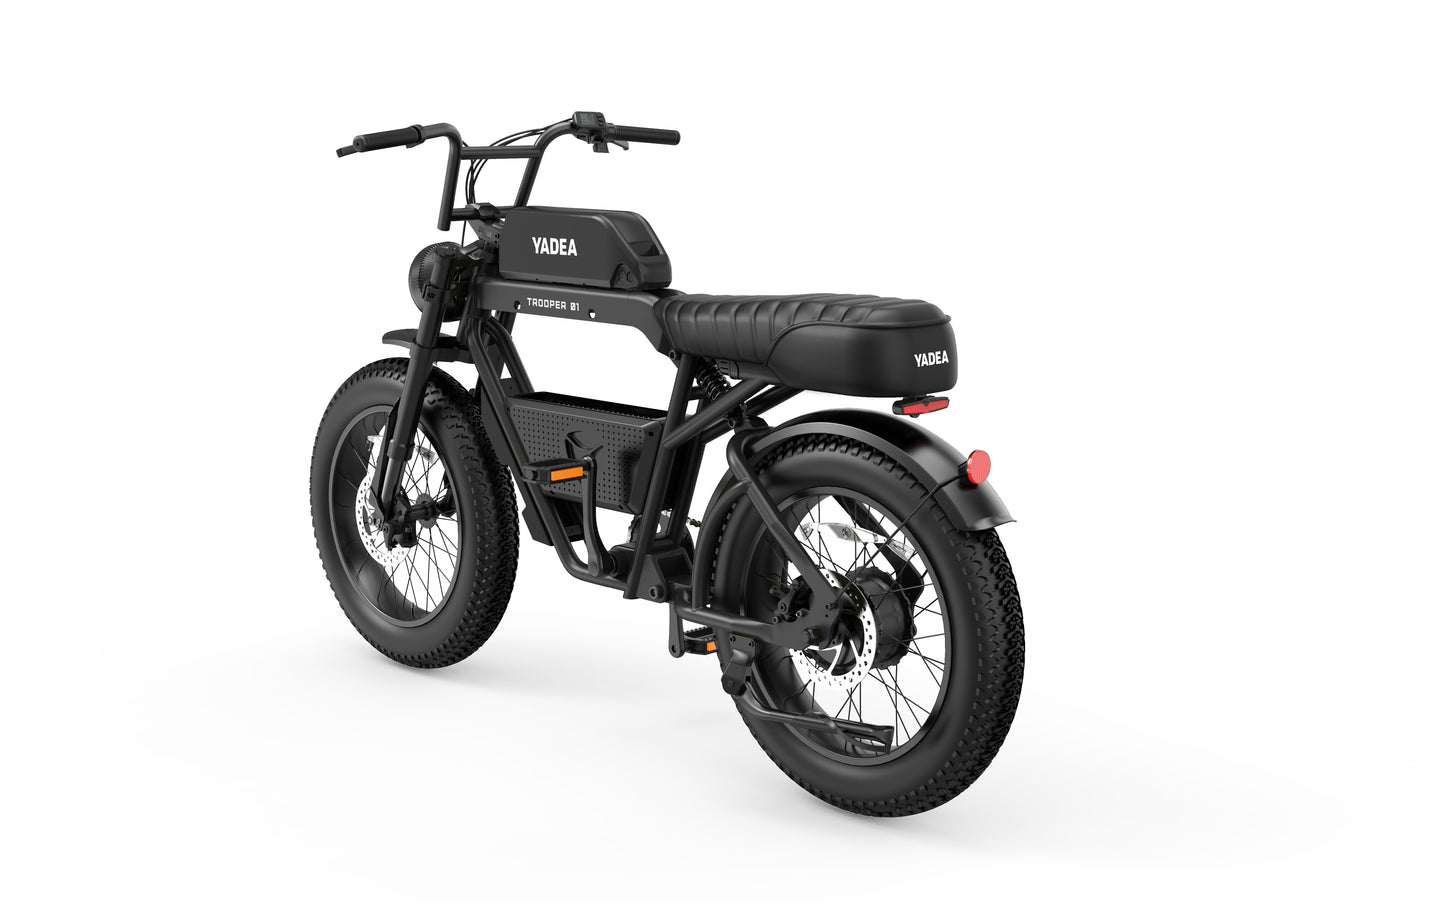 The Yadea - Trooper 01, a black electric bike with fat tires, showcasing its high-power motor on a white background.